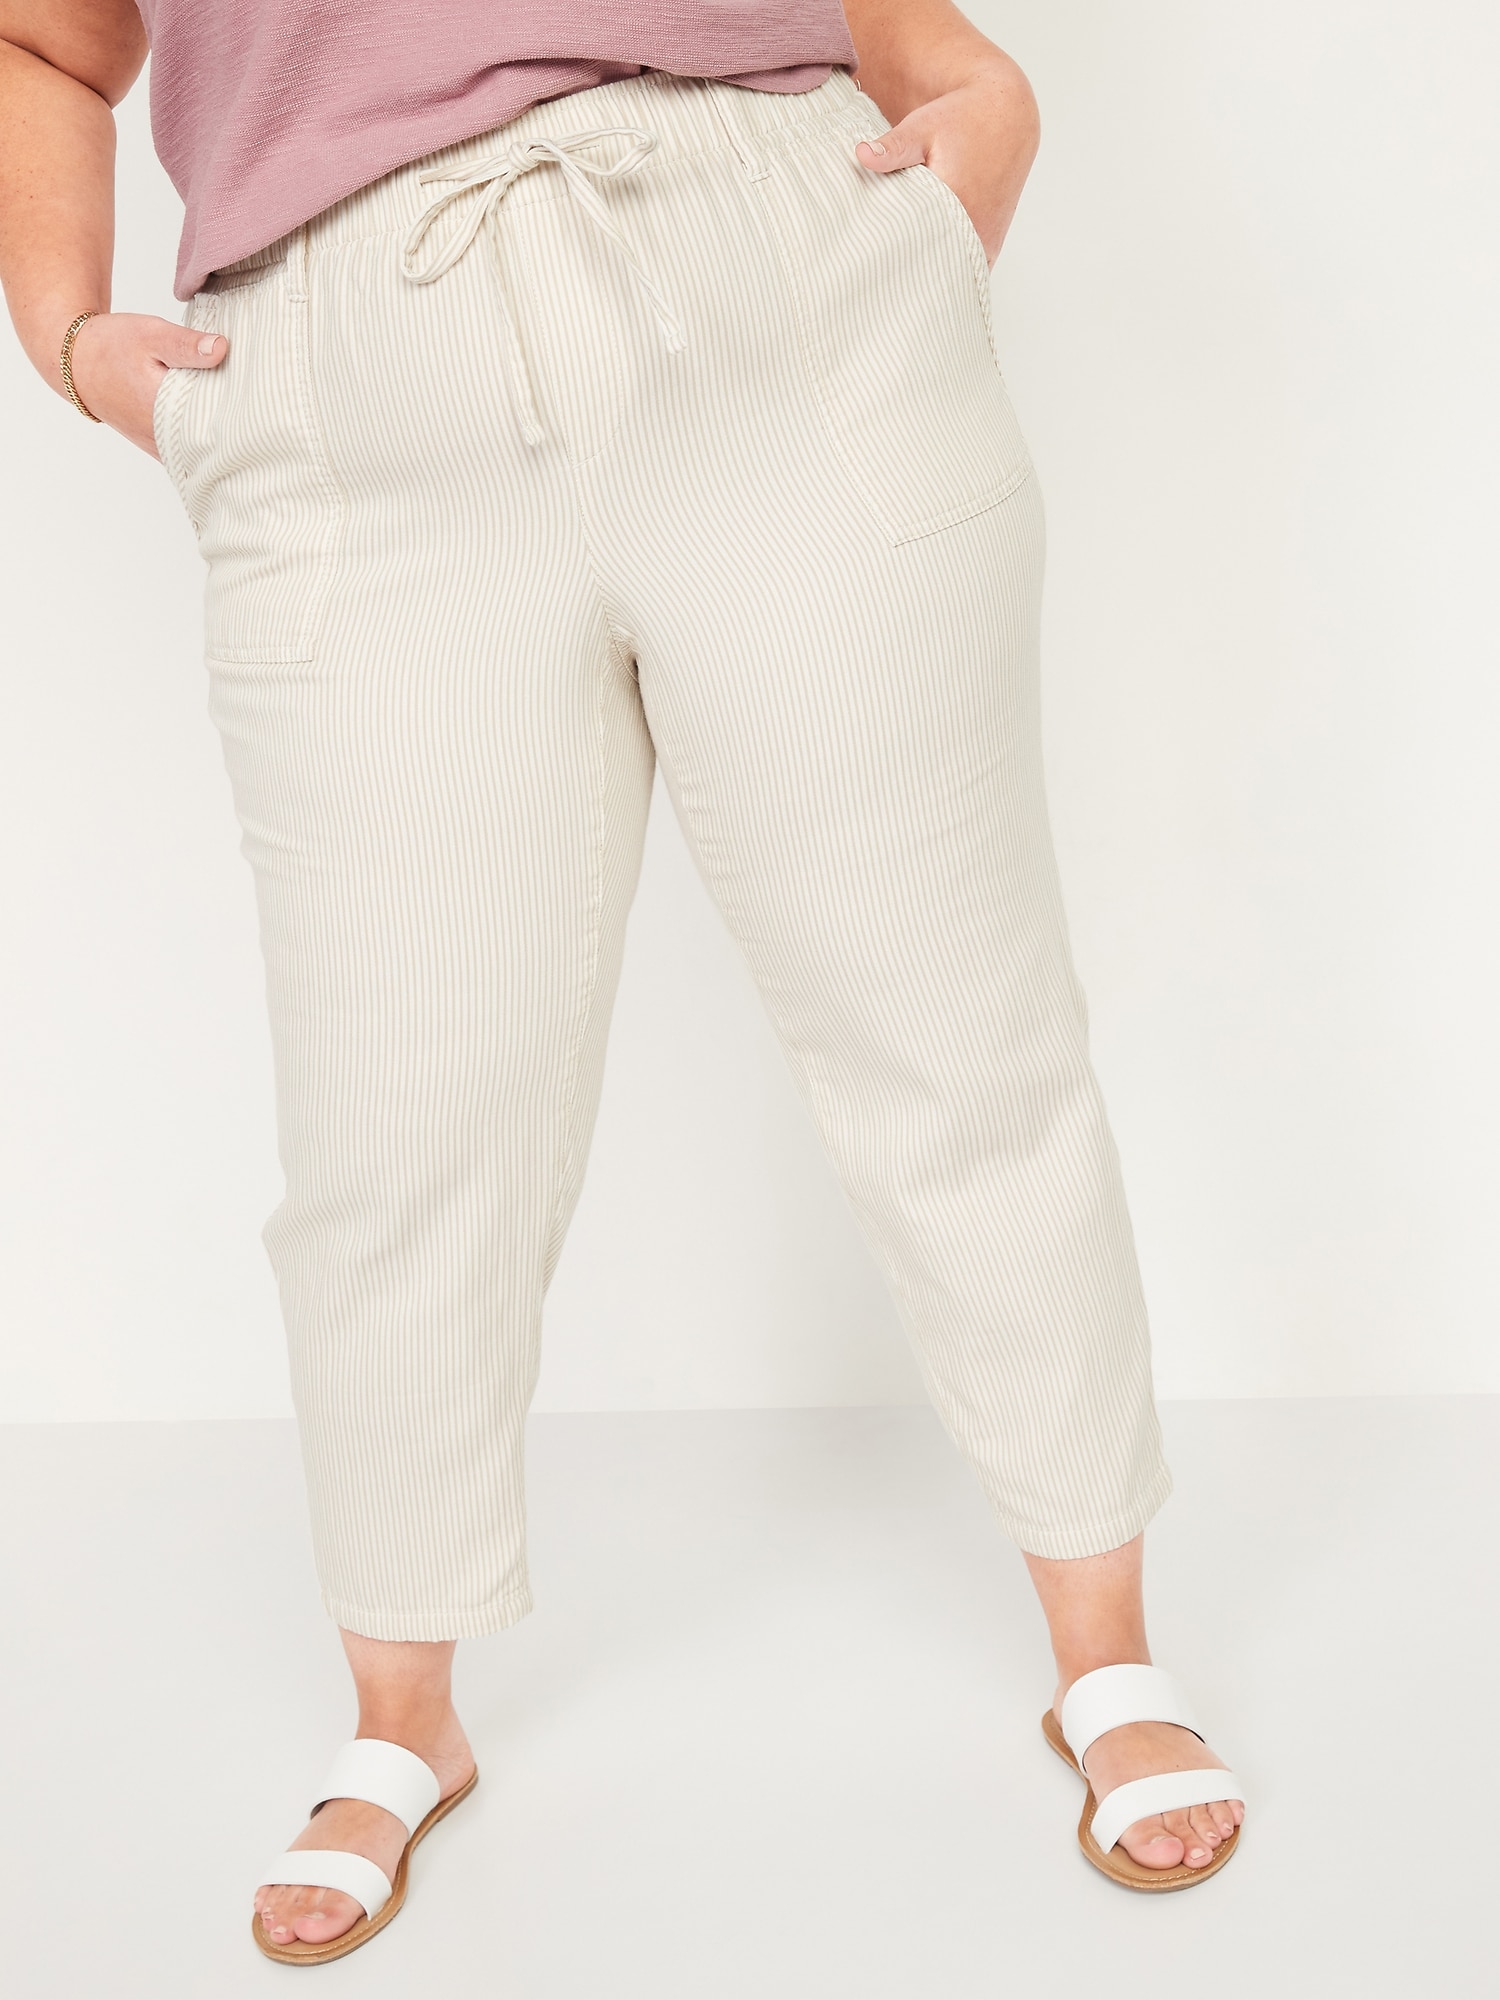 High Waisted Textured Twill Plus Size Utility Ankle Pants Old Navy